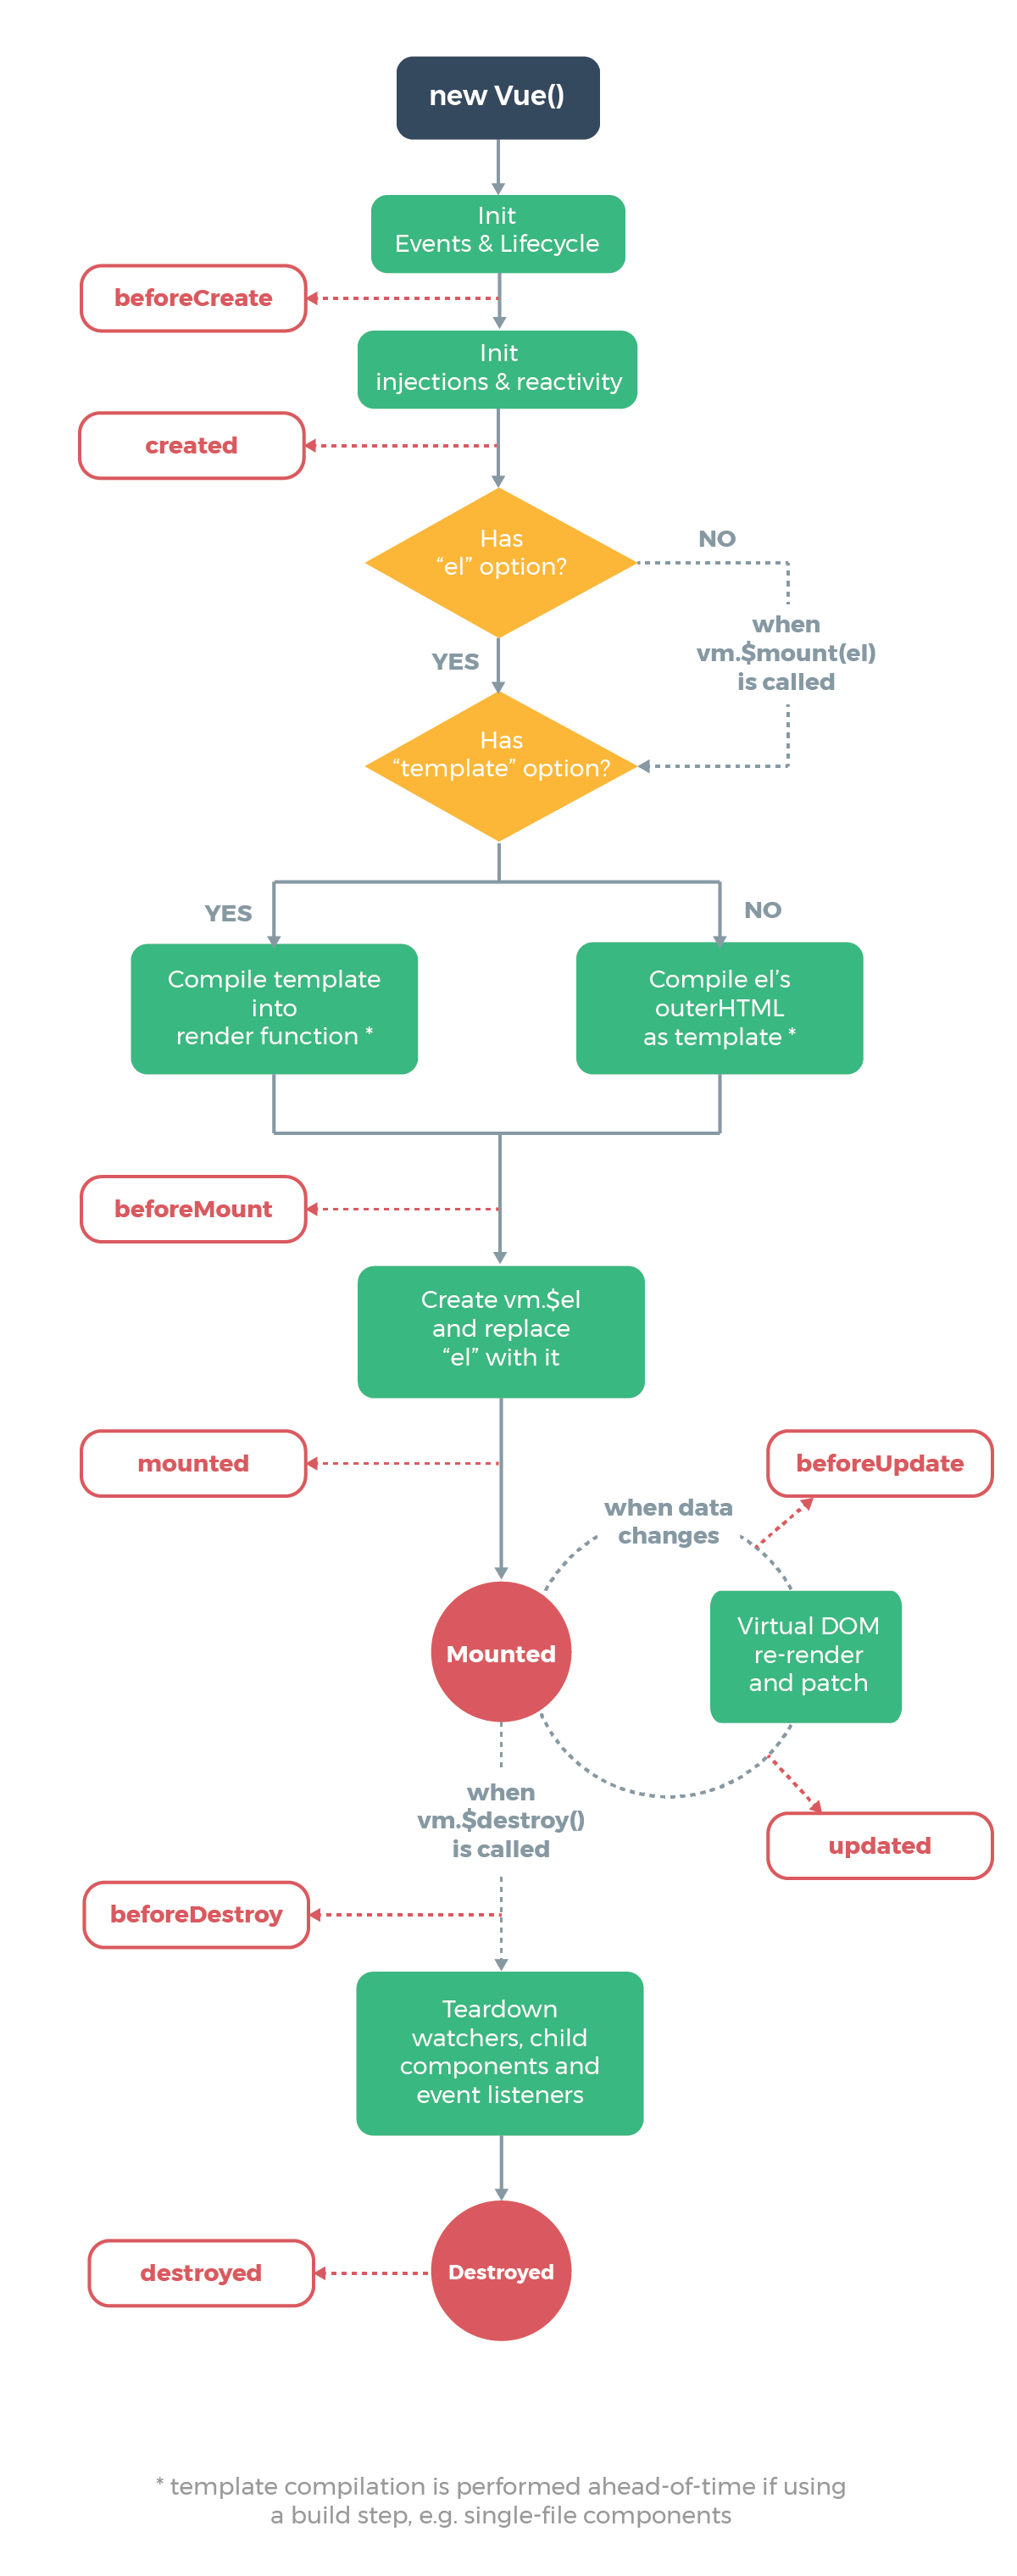 Lifecycle illustration from Vue docs